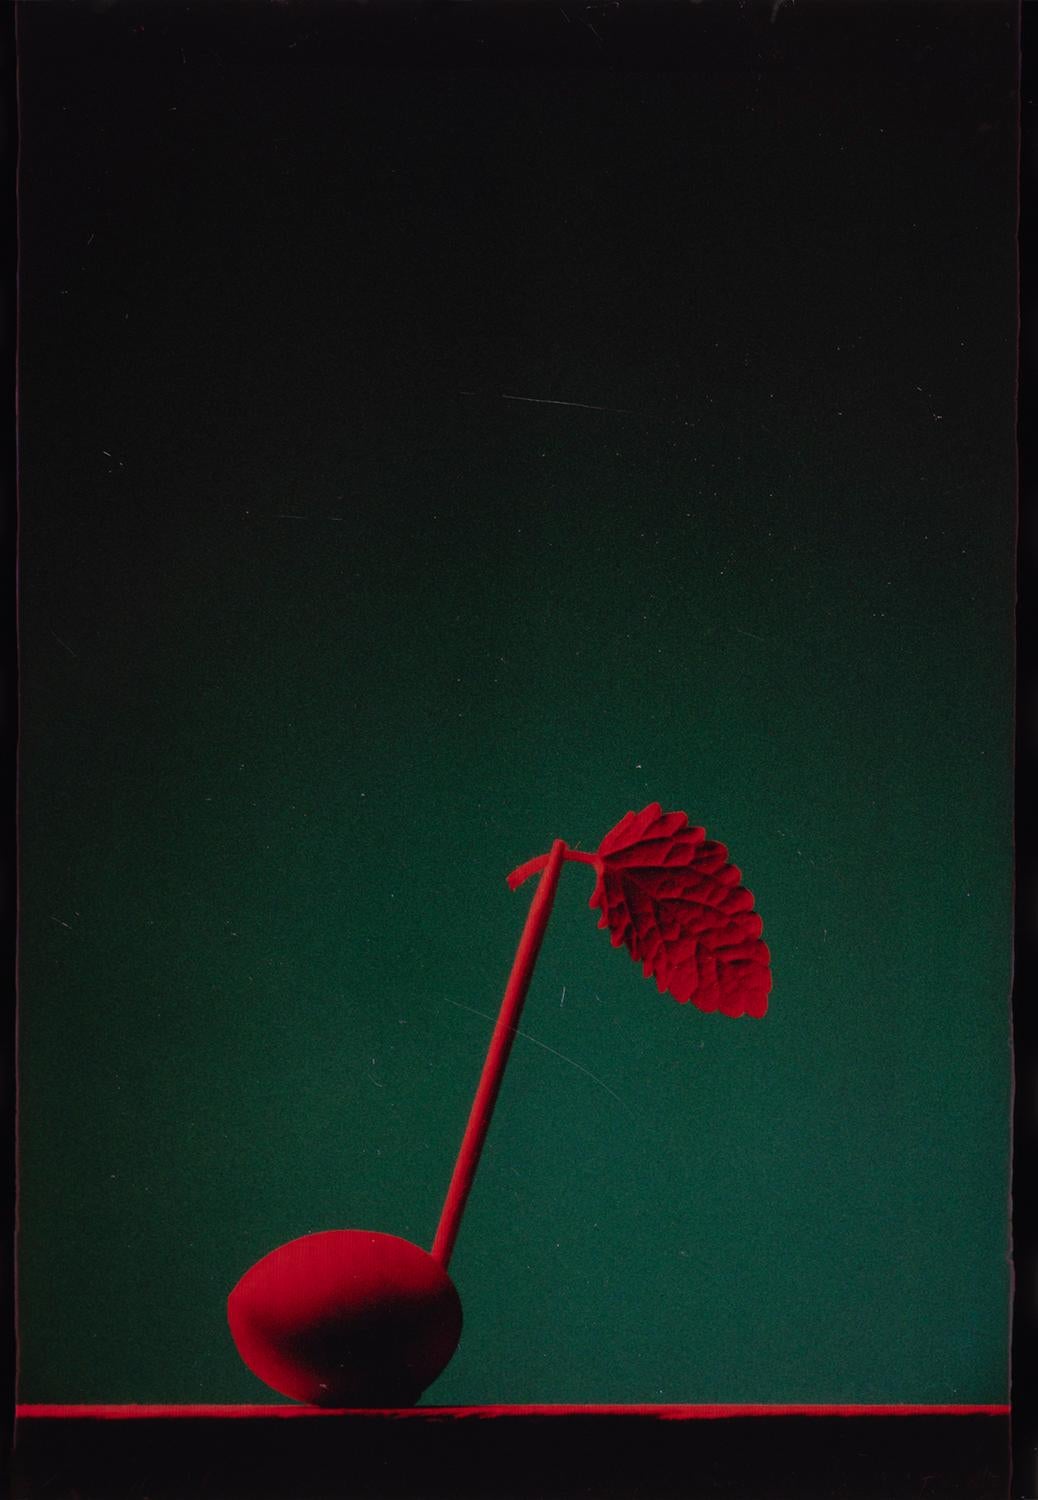 Red Note
Edition of 25
signed and numbered by the artist

This still-life picture of a Music Note consists of an olive, mint leaf and a toothpick. It was shot on Polaroid Polachrome Transparency Film in the 80s.

JJK is a pseudonym for one of the